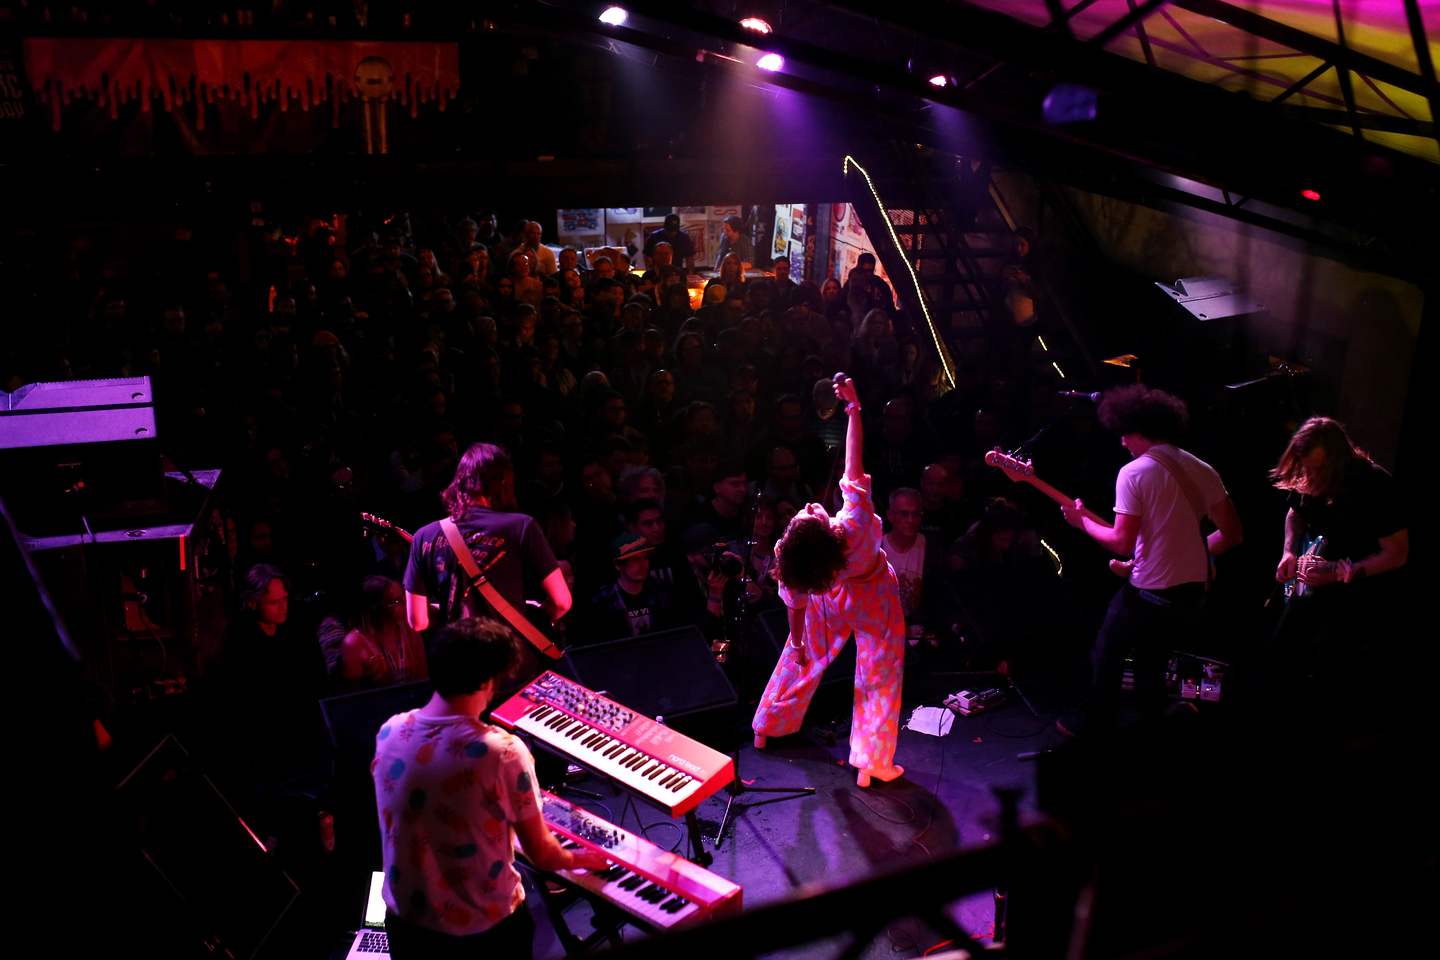 Jake Knight, Andrew Cashen, Sabrina Ellis, Jon Fichter, and Joshua Merry of Sweet Spirit perform onstage at The Onion & AV Club event at Mohawk. Photo by Travis P Ball/Getty Images for SXSW